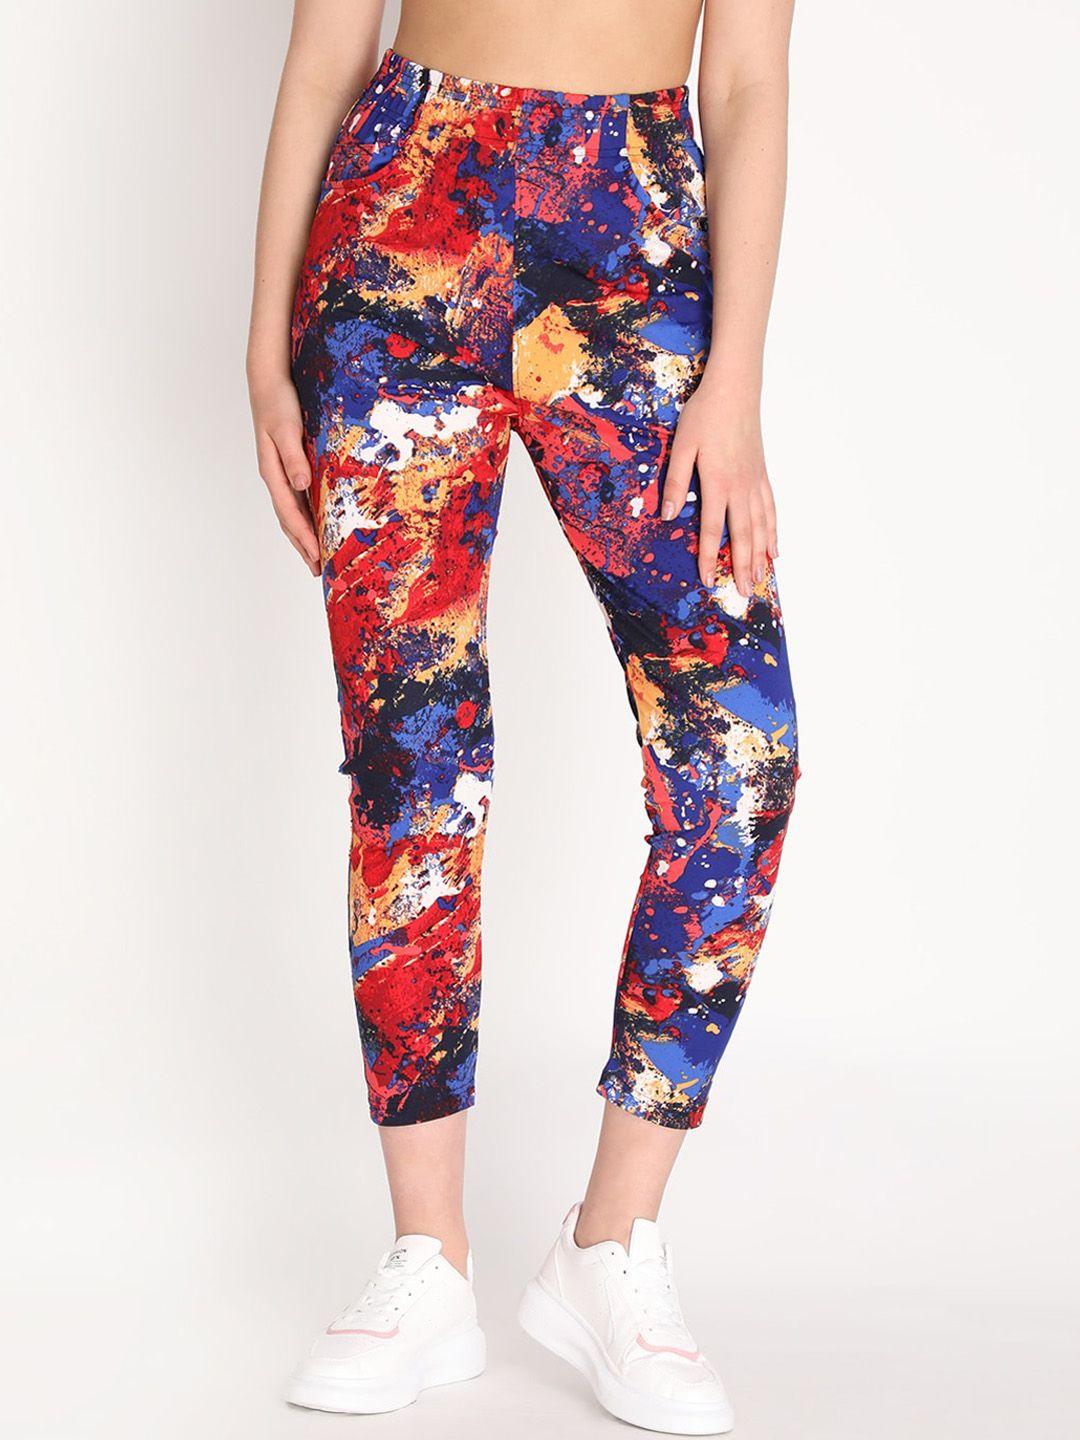 chkokko women red & blue printed training or gym track pants